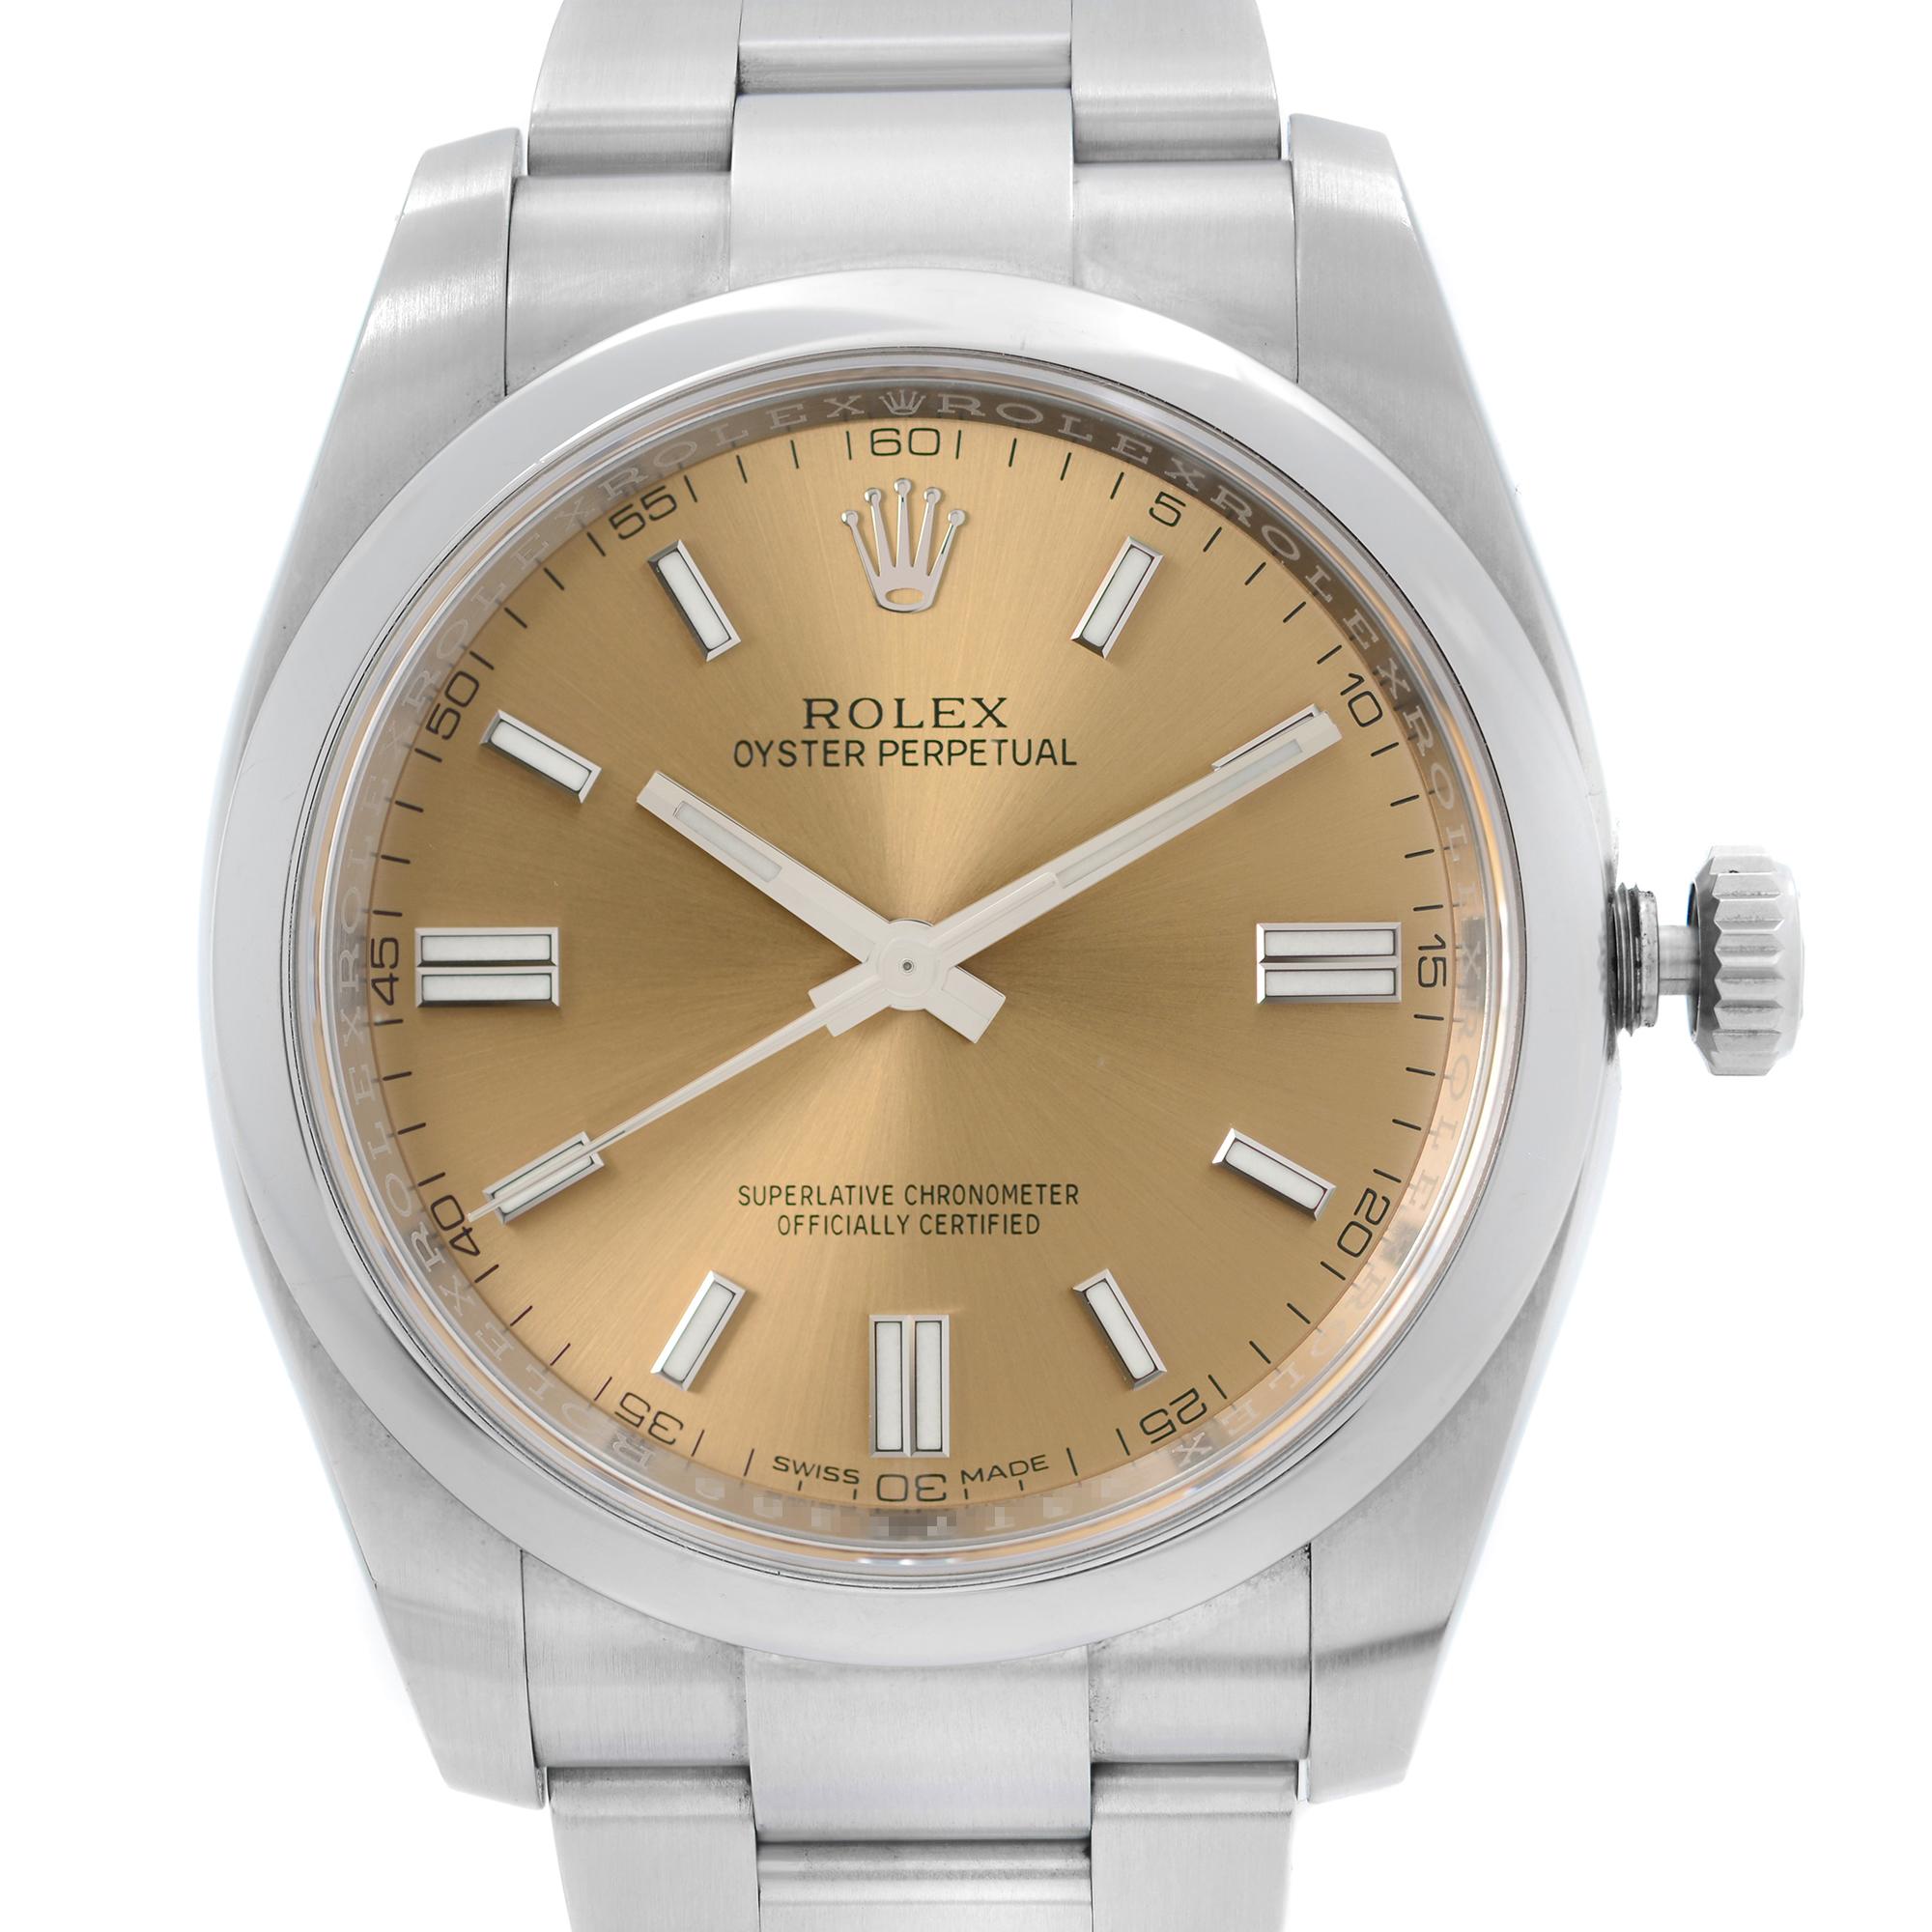 Pre Owen Rolex Oyster Perpetual 36mm Steel Grape Dial Automatic Men's Watch 116000. This Beautiful Timepiece Comes with 2018 and is Powered by Mechanical (Automatic) Movement And Features: Round Stainless Steel Case with an Oystersteel 3 piece Flat